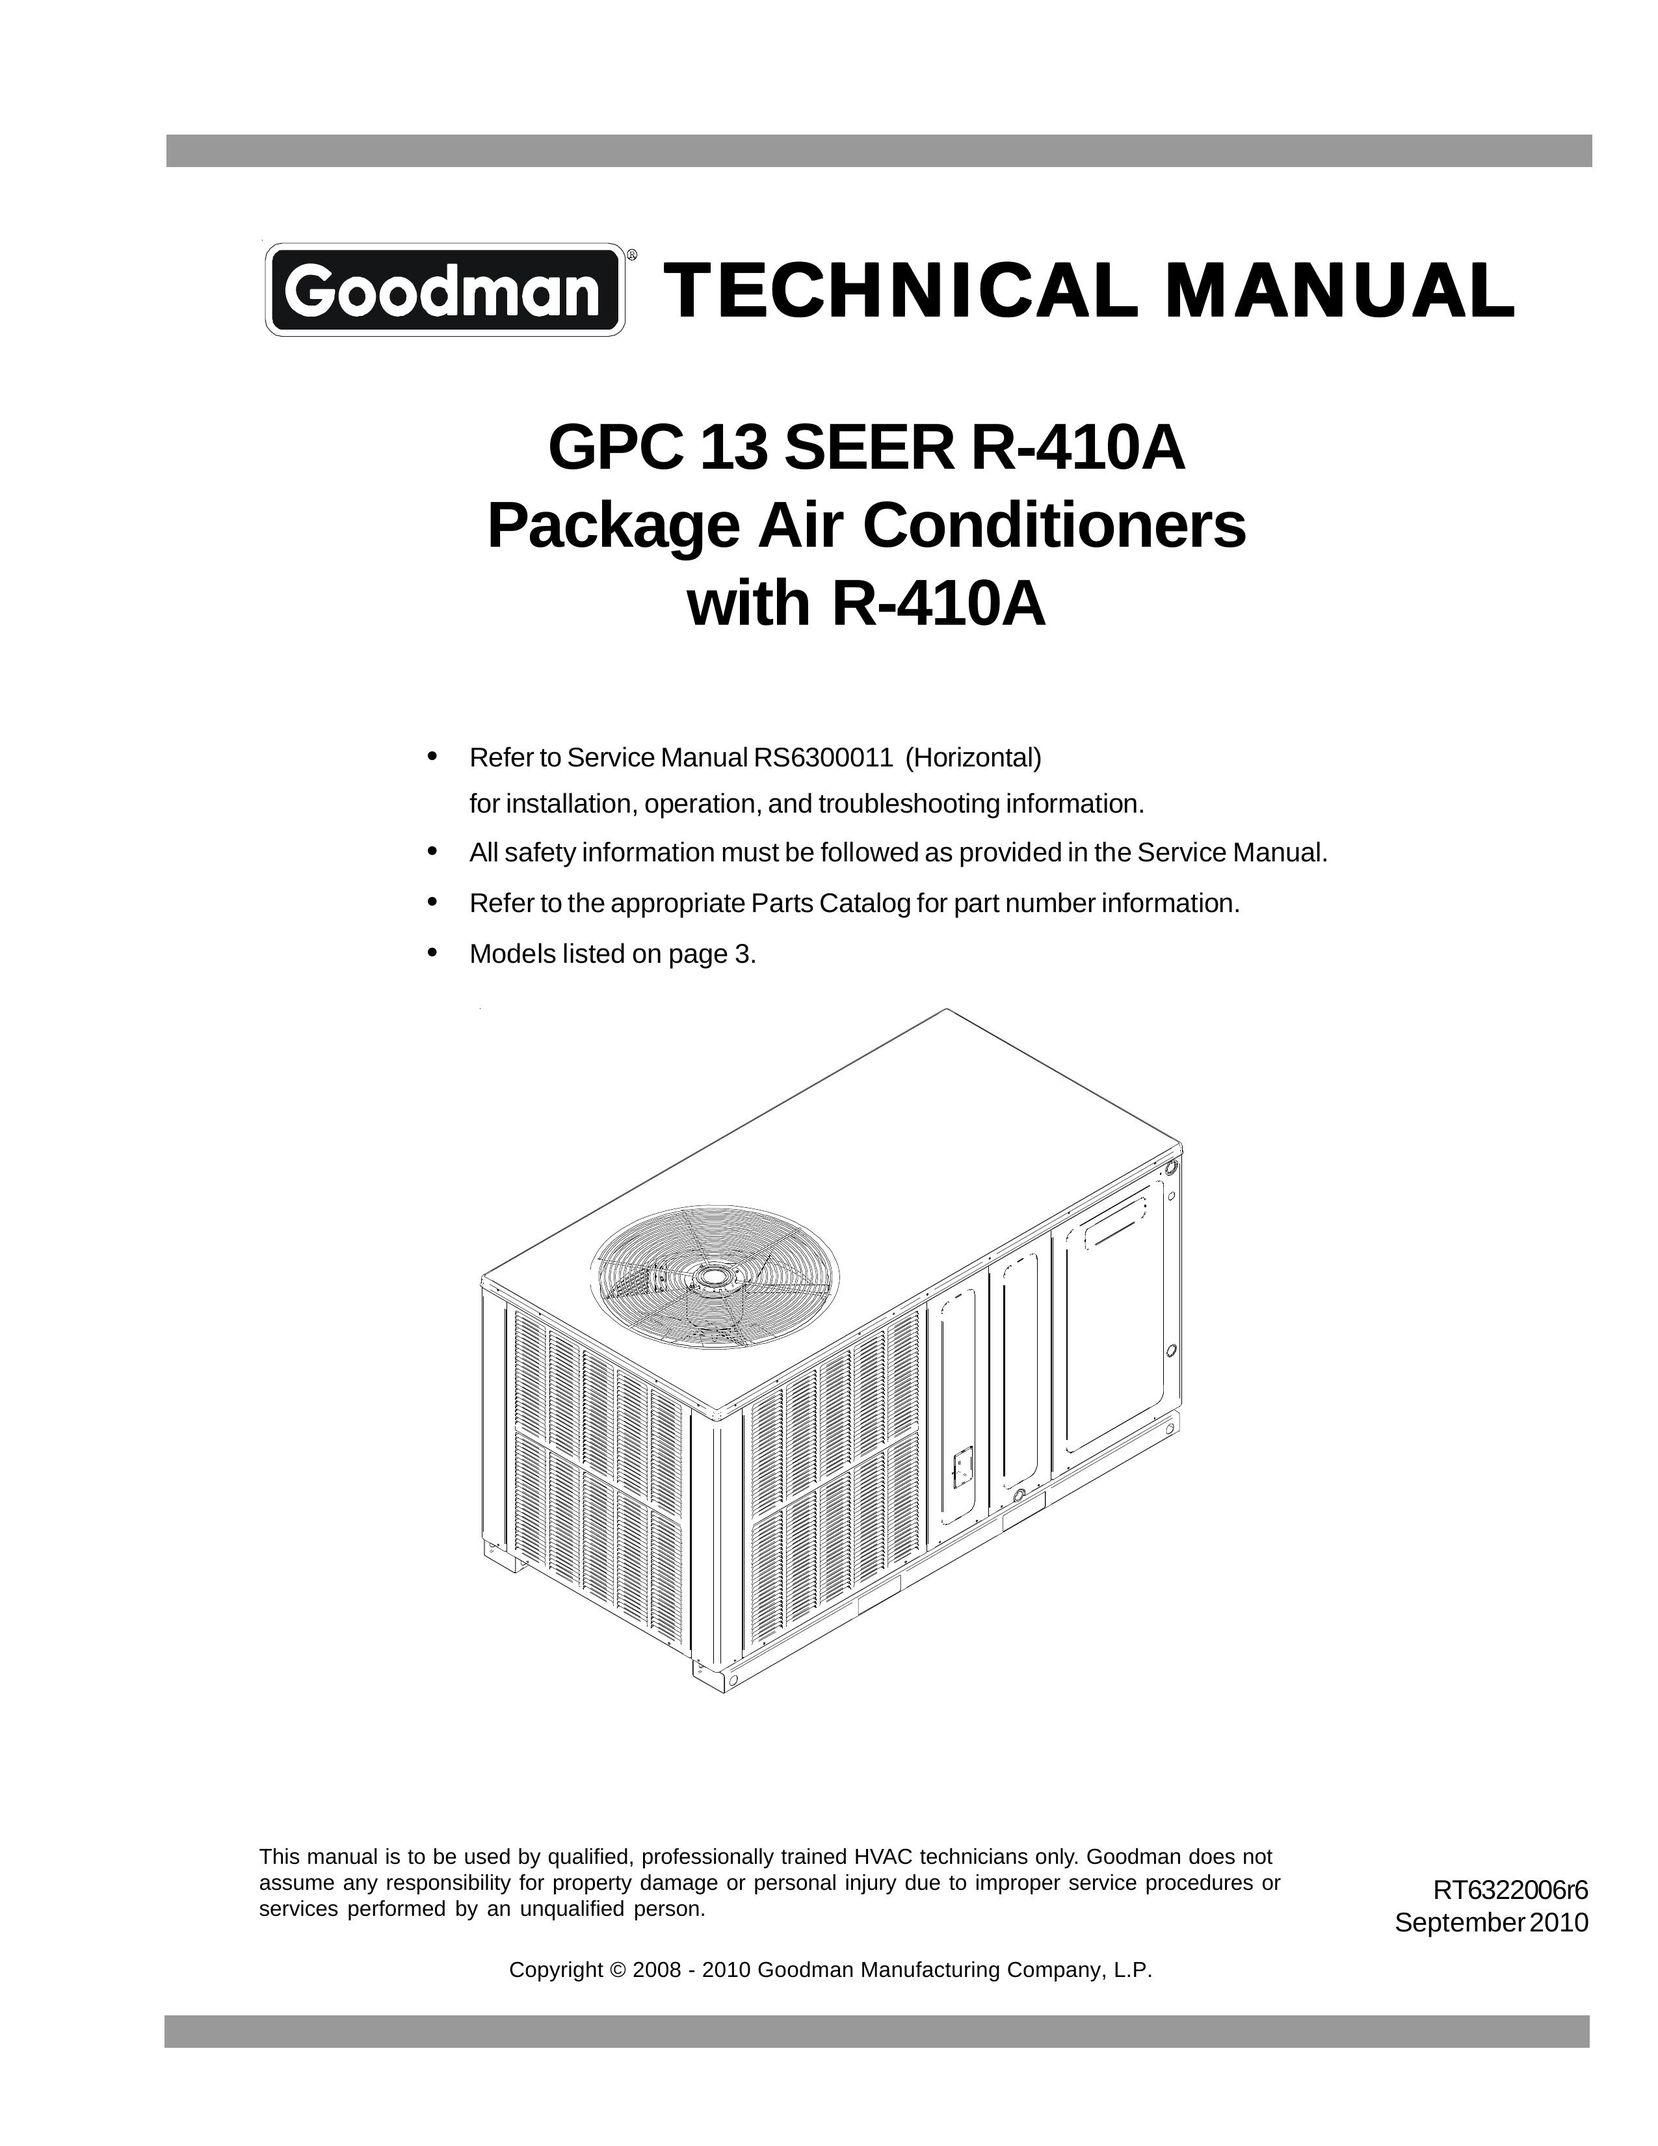 Goodmans GPC 13 SEER R-410A Air Conditioner User Manual